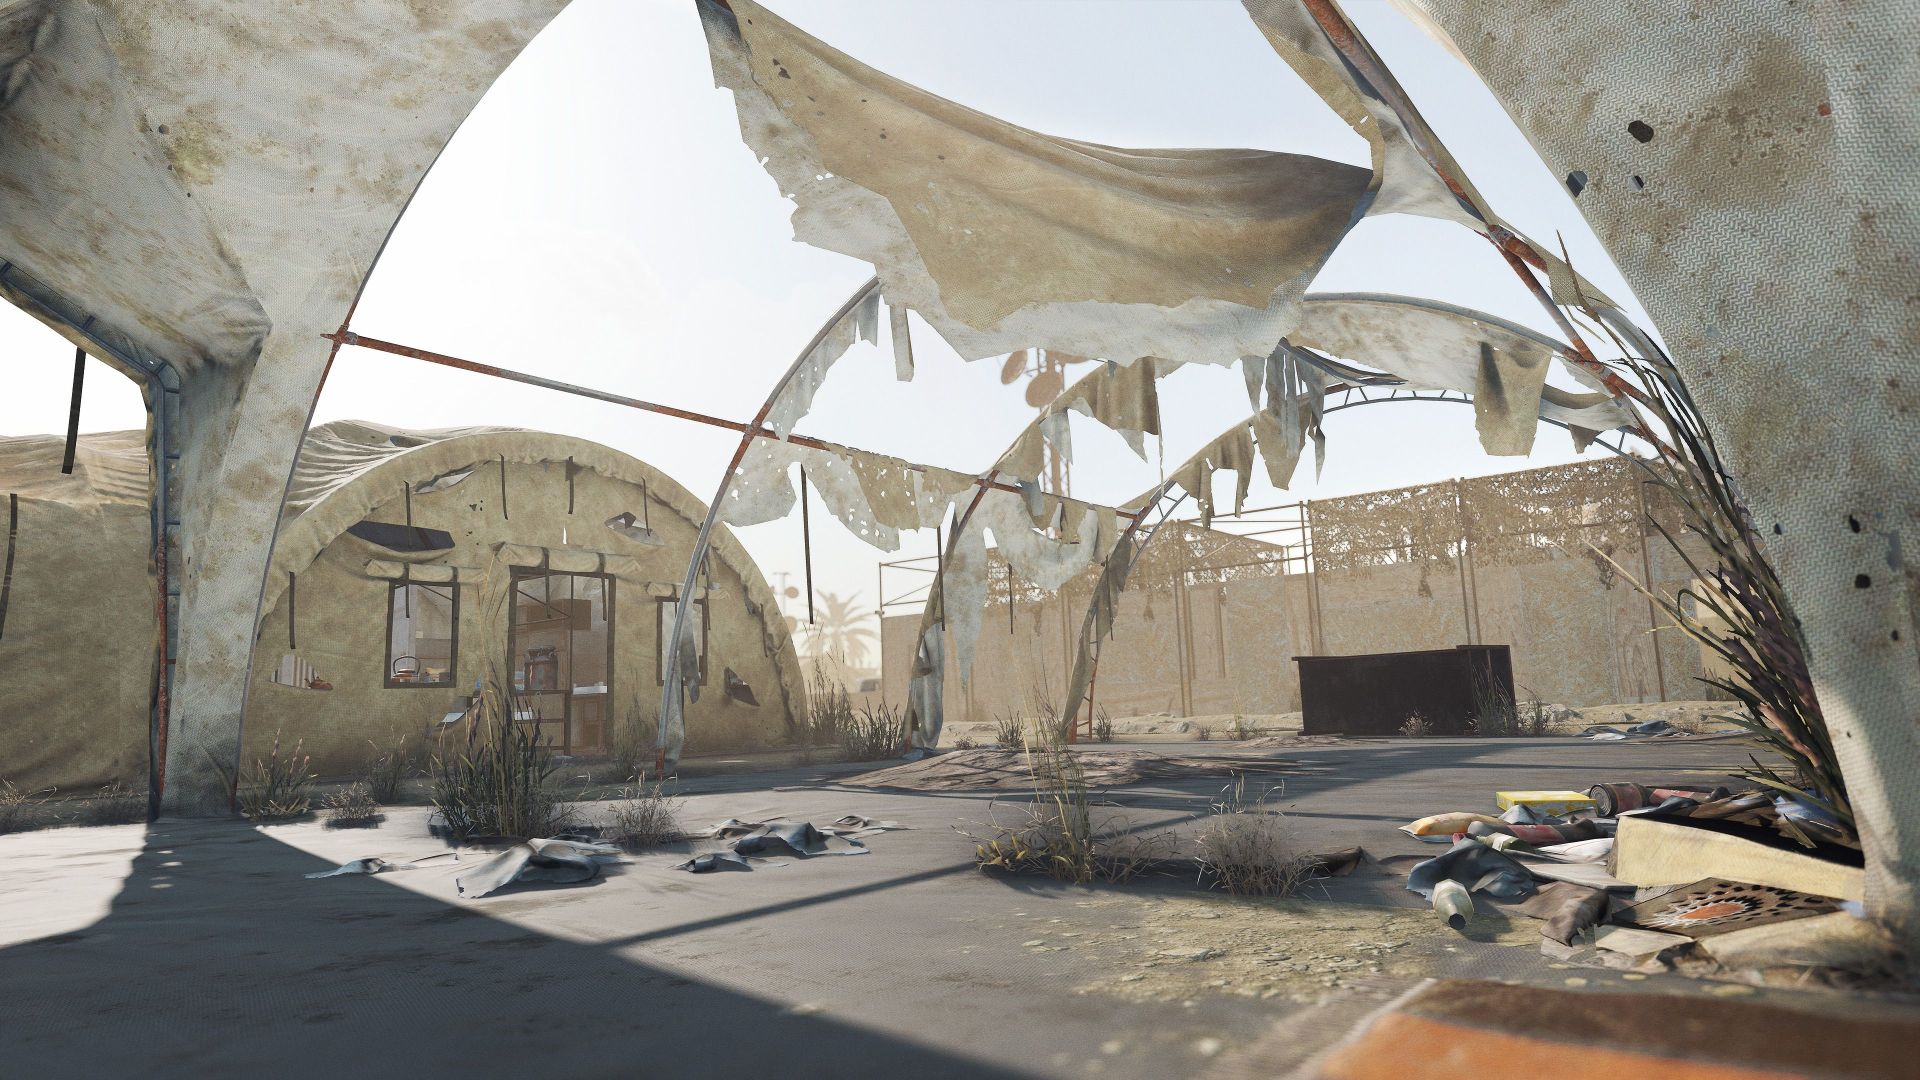 Rust’s November update brings desert bases and new rocket launching system